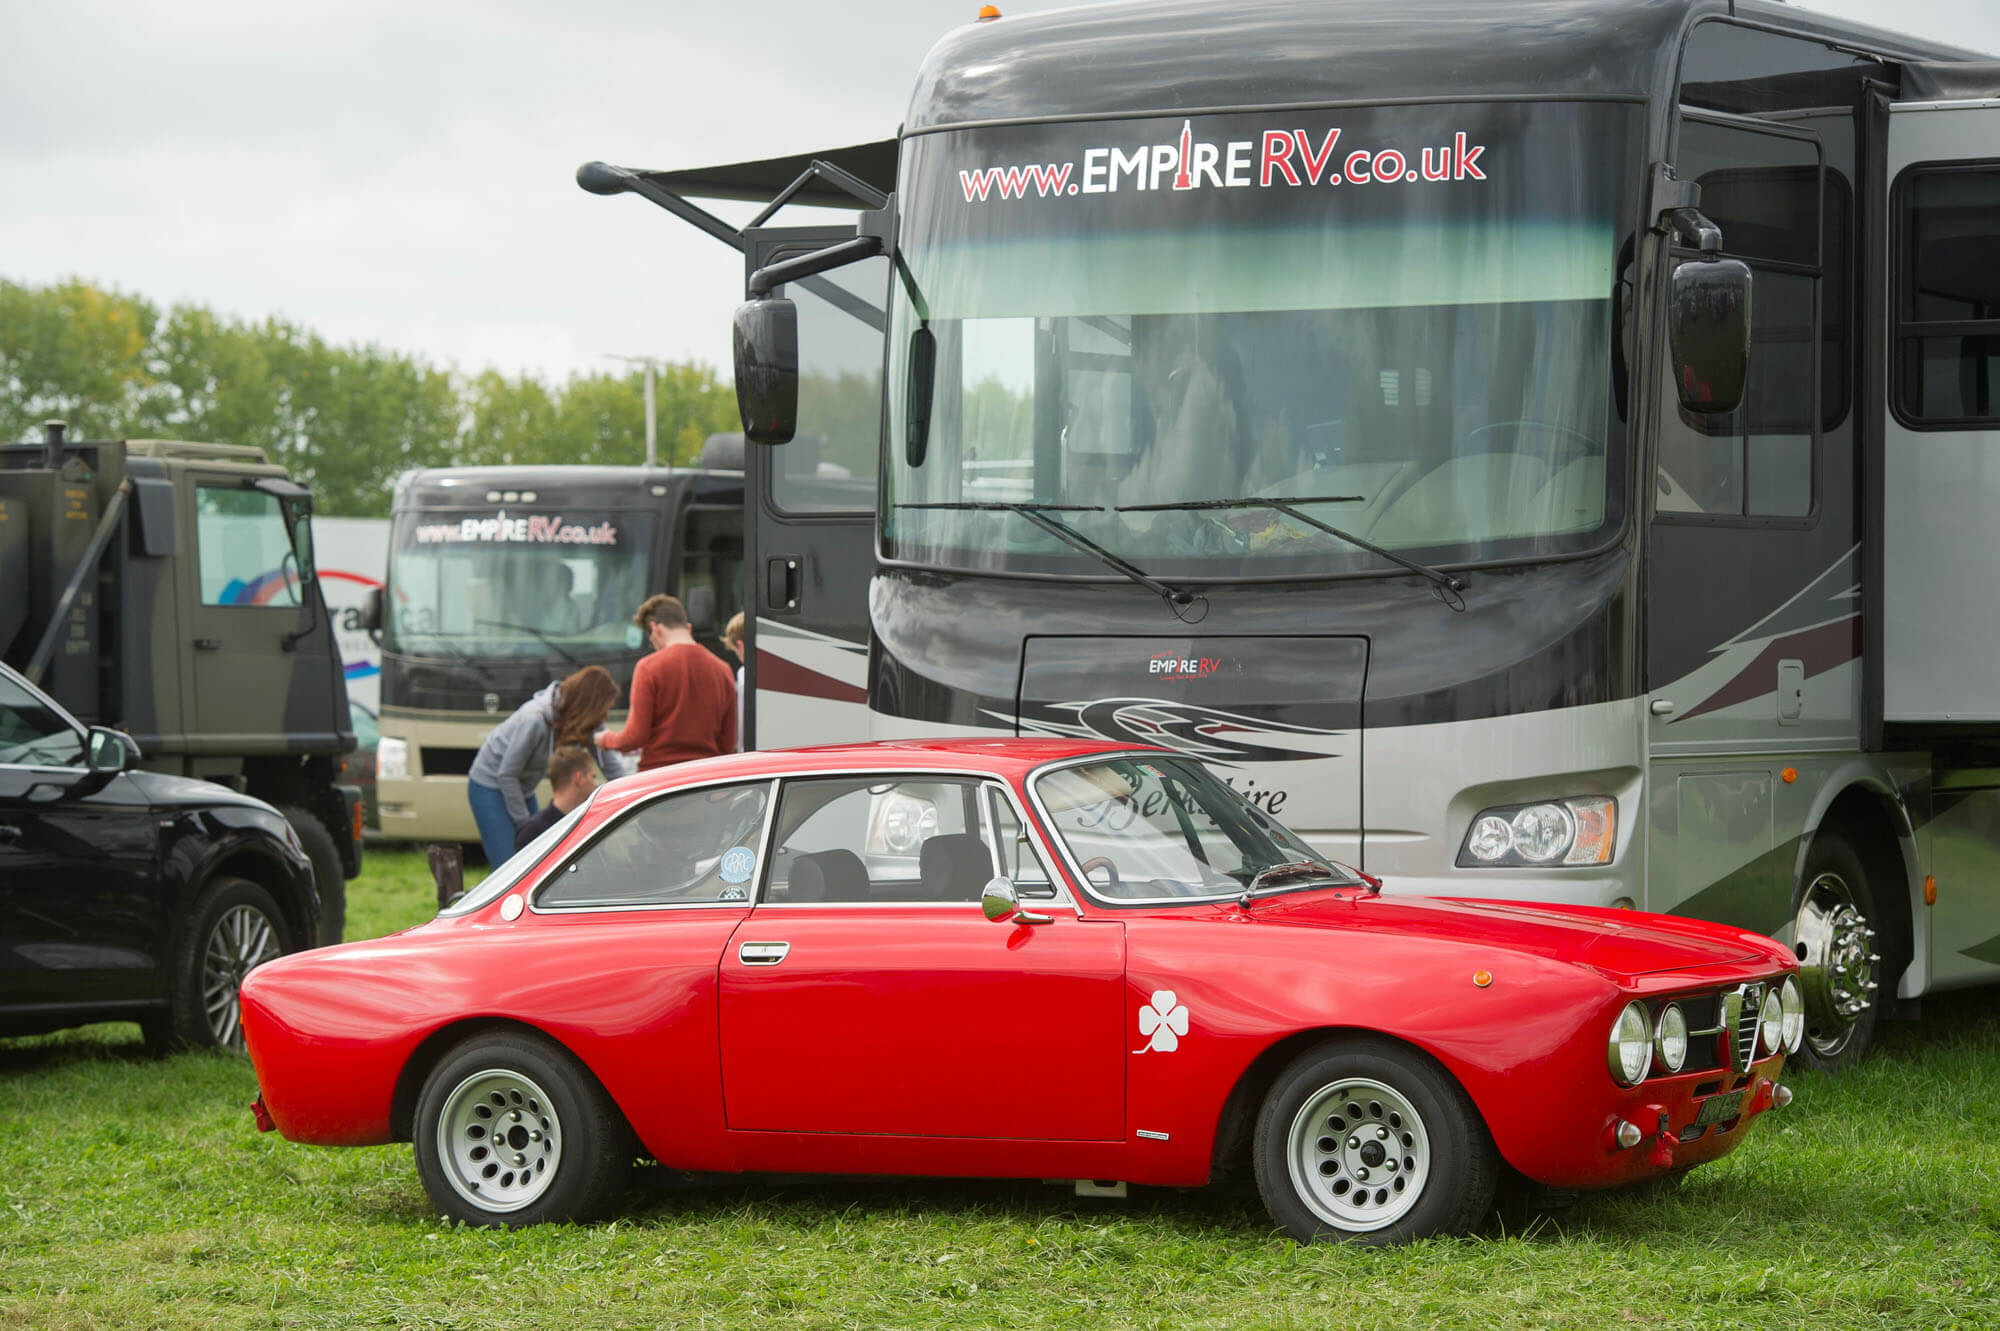 An Empire RV Motorhome parcked behind a red classic car